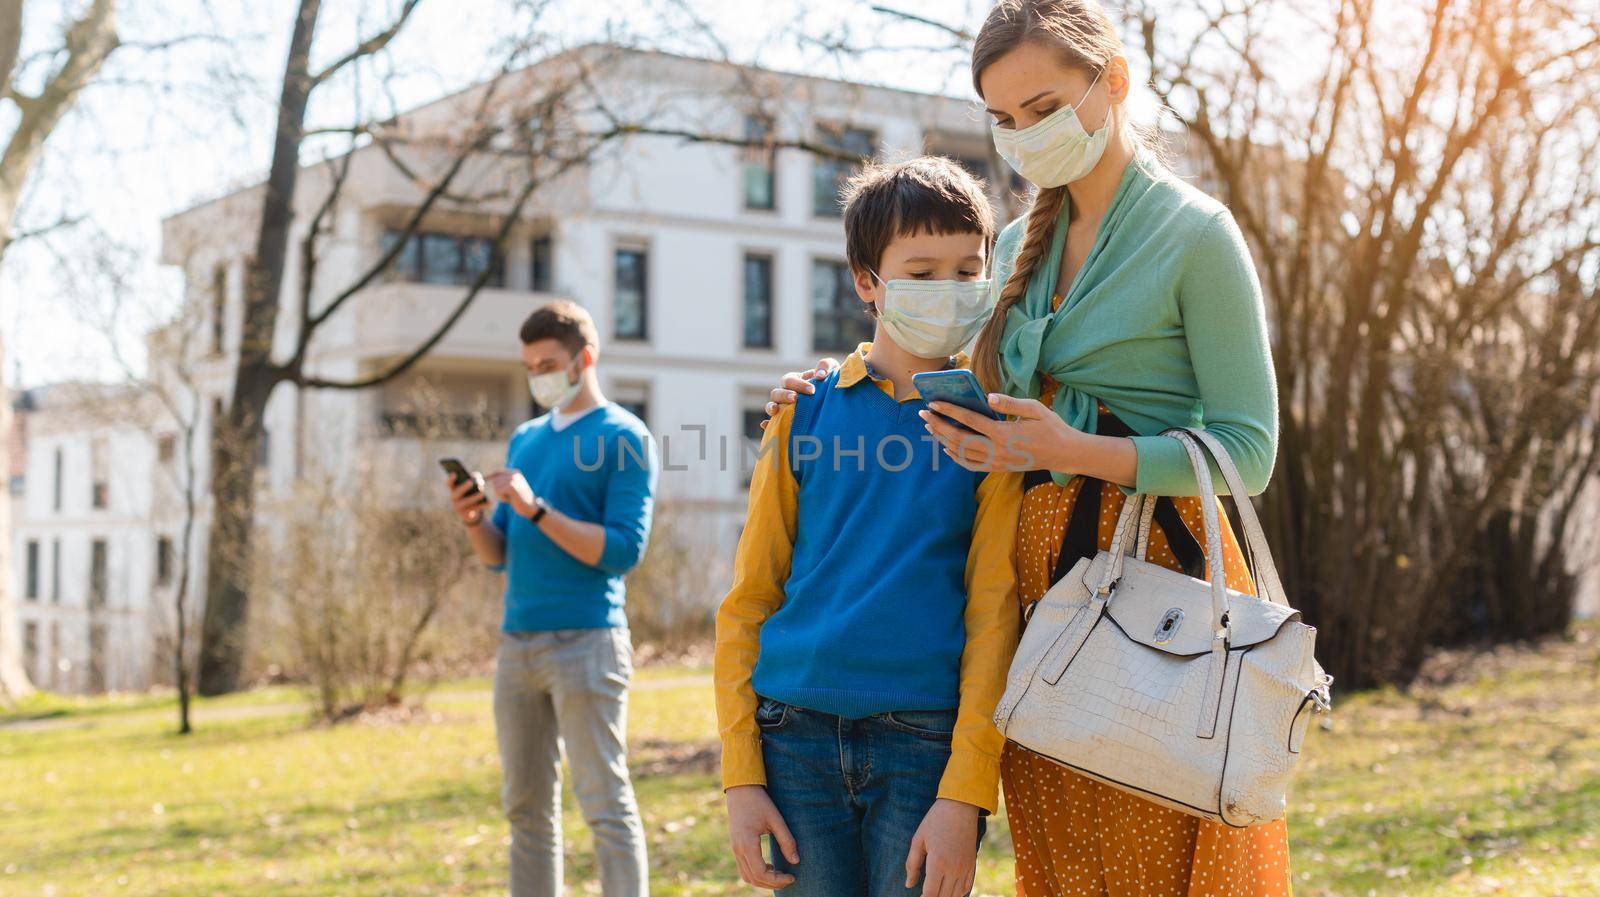 Family during corona crisis checking news on their phones standing in park